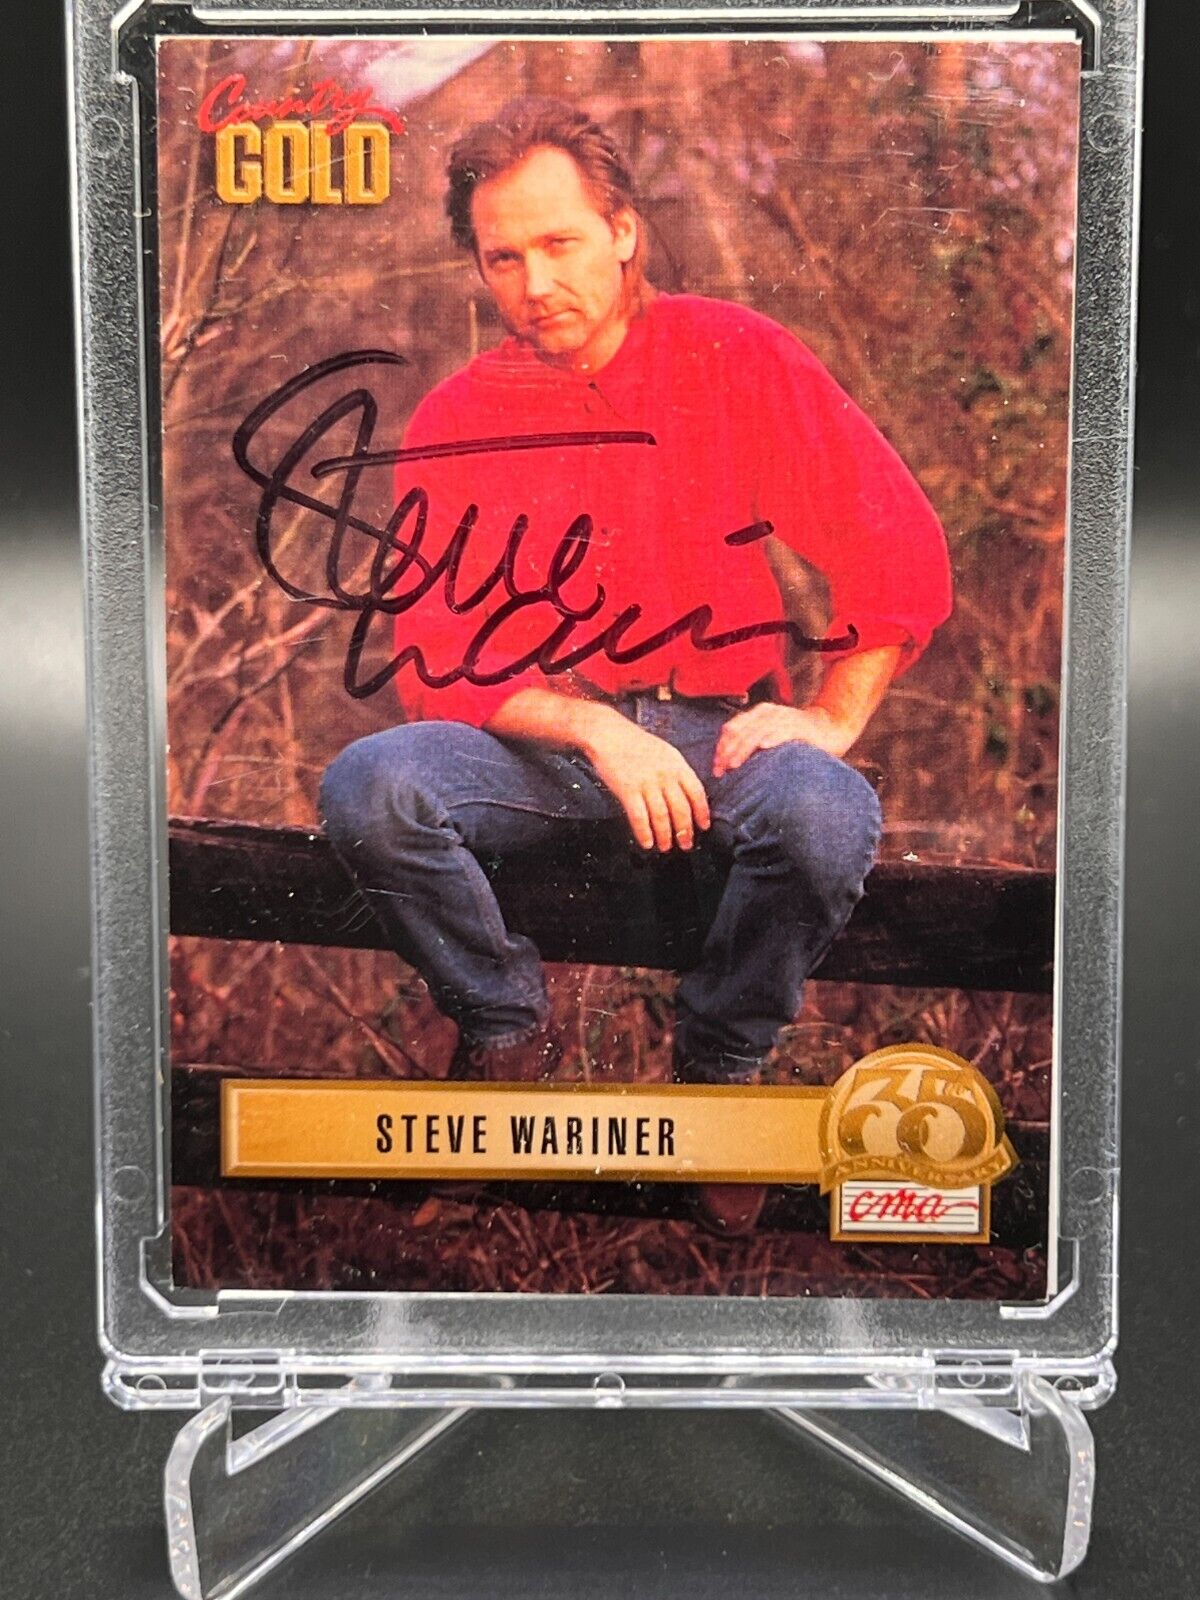 1993 Country Gold Series 2 #60 Steve Wariner AUTOGRAPH with COA